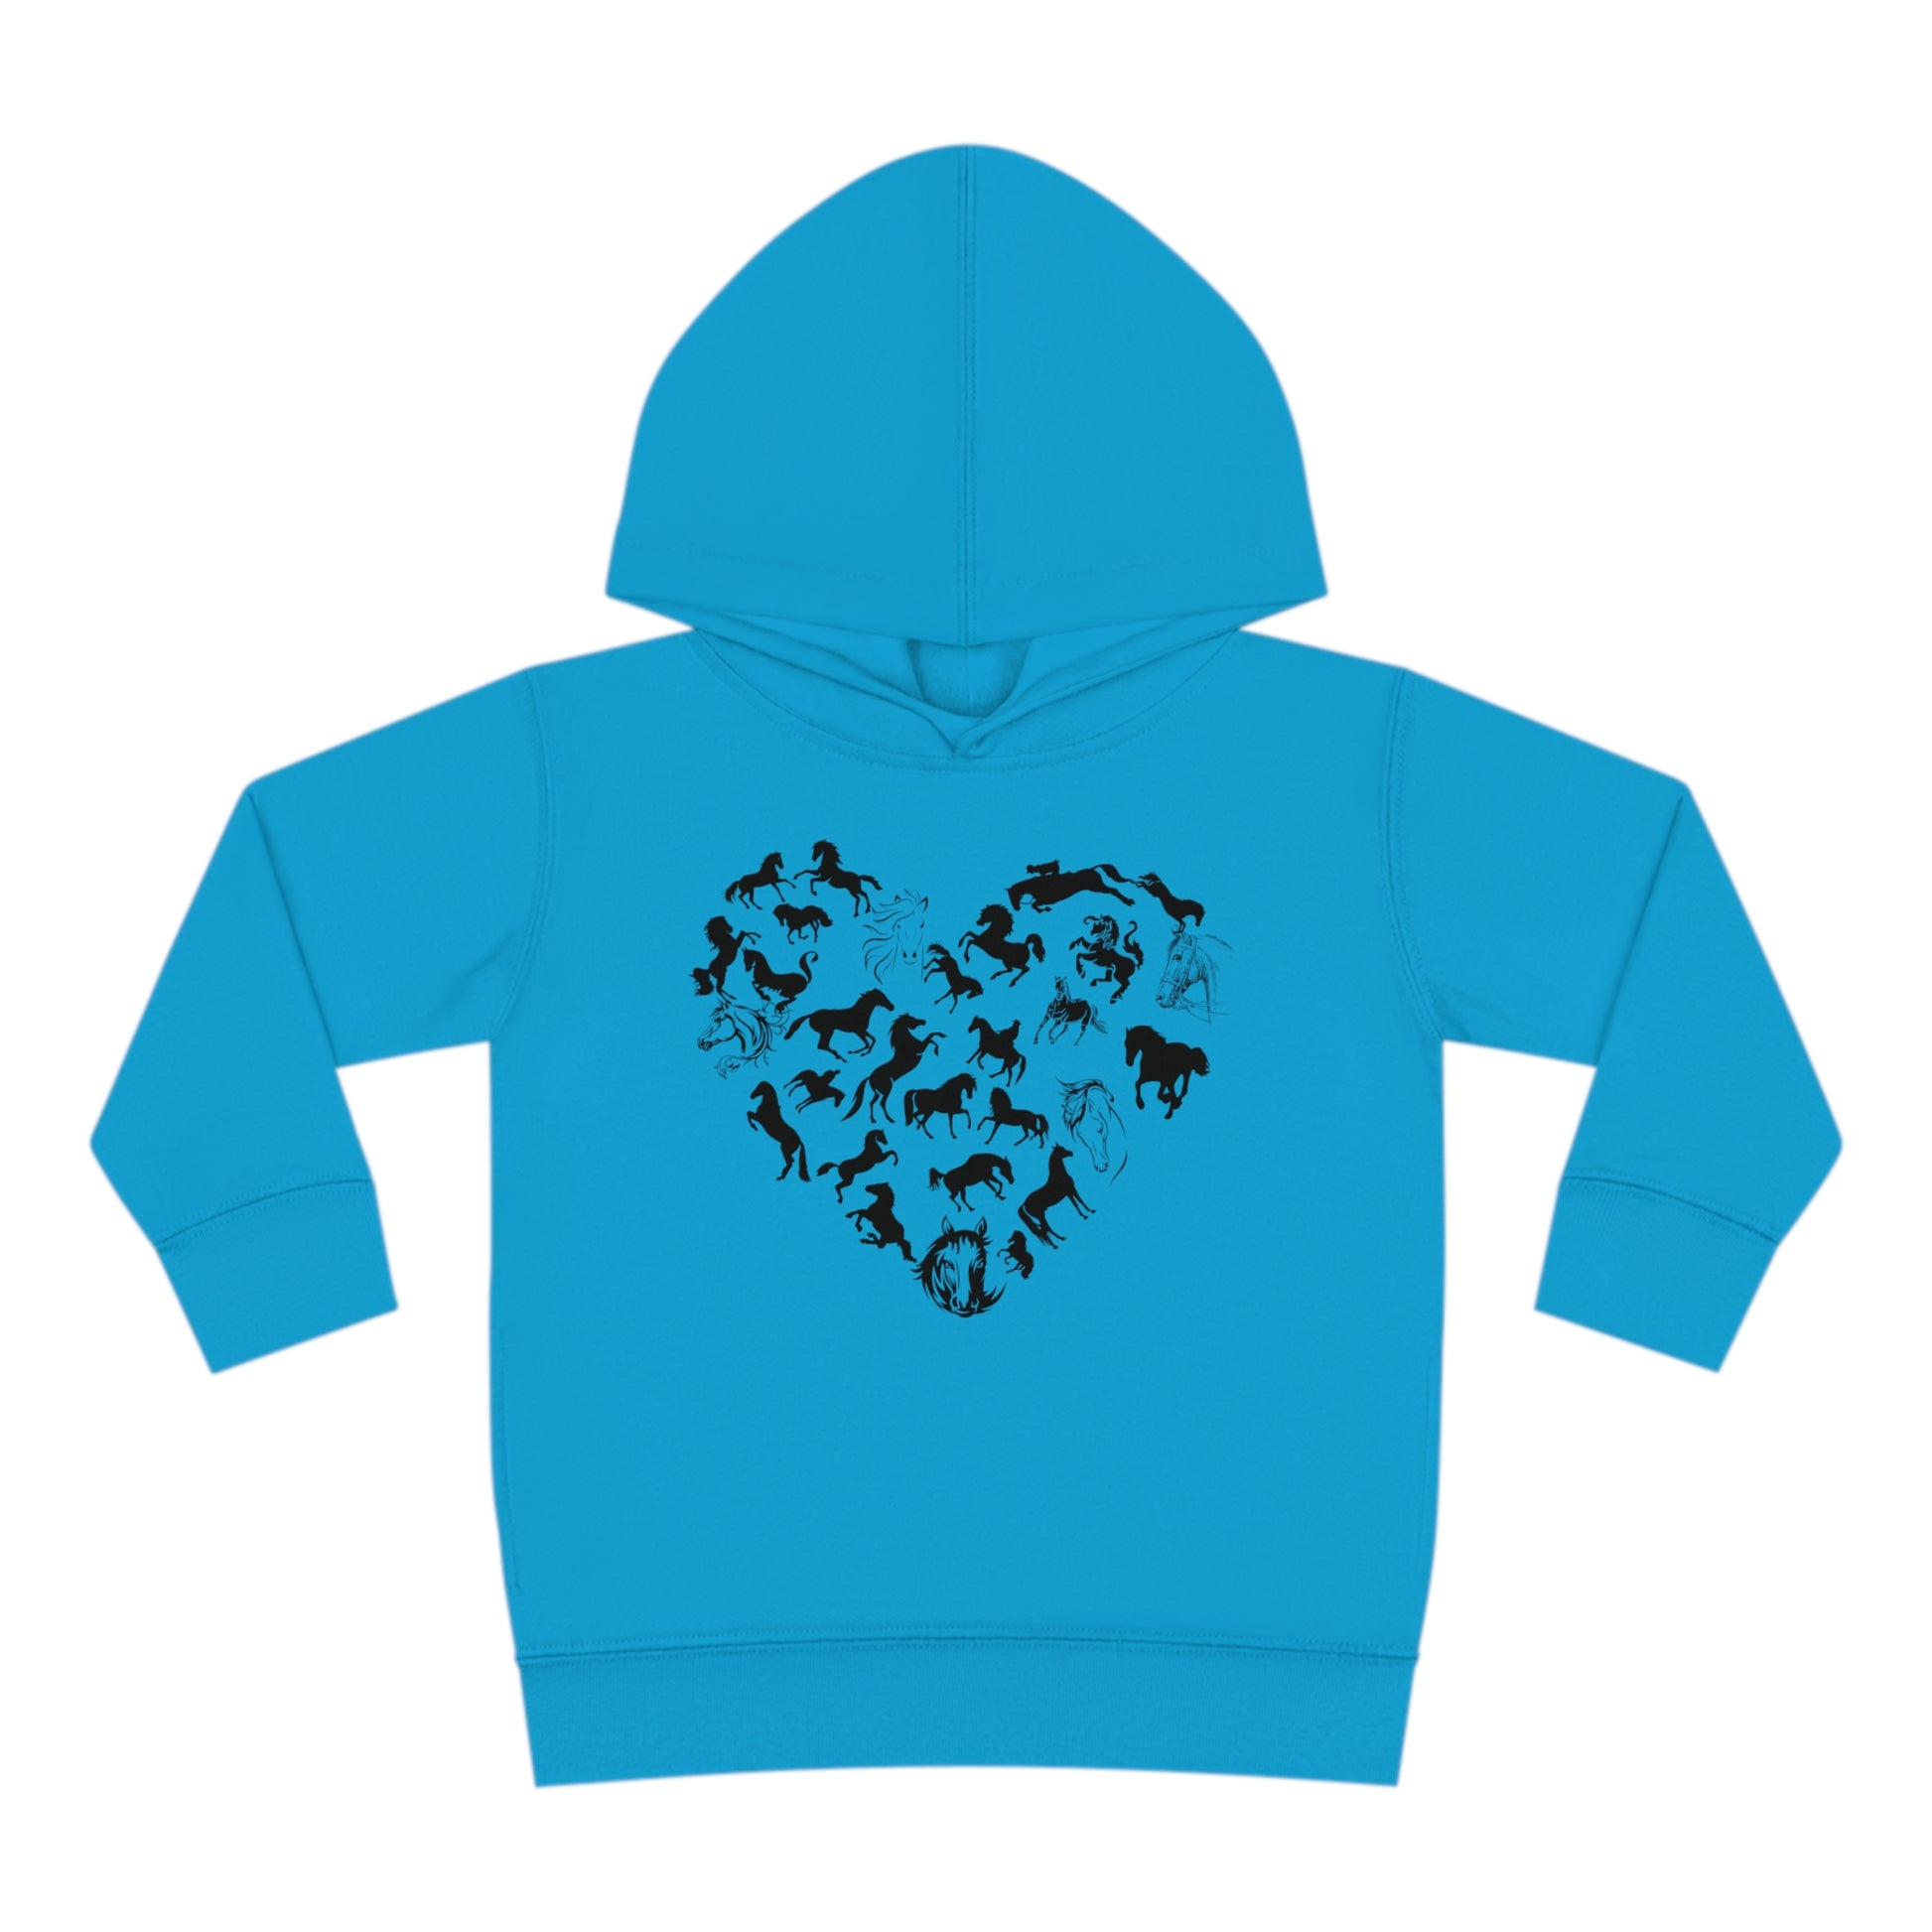 Horse Heart Hoodie | Horse Lover Tee - Horses Heart Toddler - Horse Lover Gift - Horse Toddler Shirt - Equestrian Tee - Gift for Horse Owner Kids clothes Turquoise 2T 